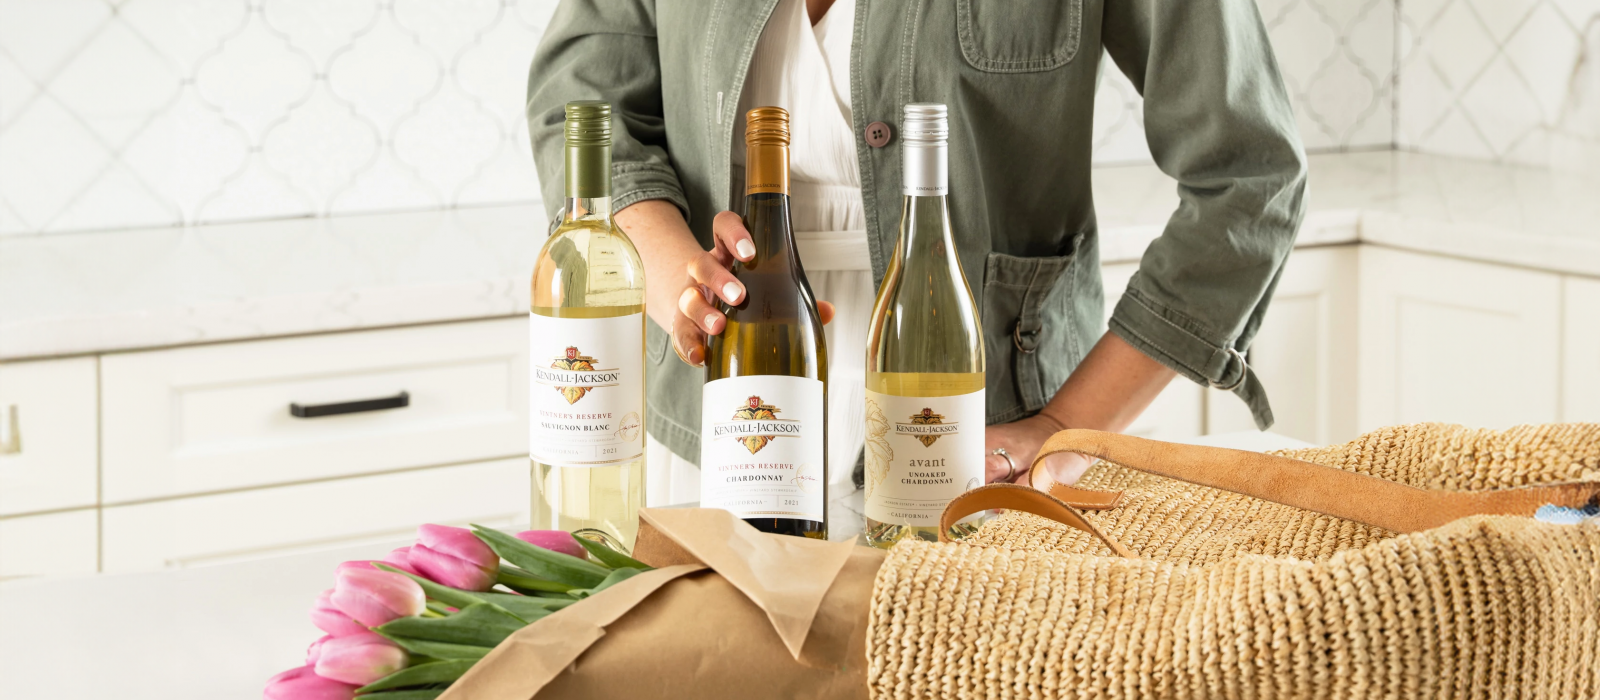 A millennial mom beams with joy in her modern farmhouse kitchen as she unwraps a Mother’s Day gift of fresh tulips and her favorite bottles of Kendall-Jackson wine.